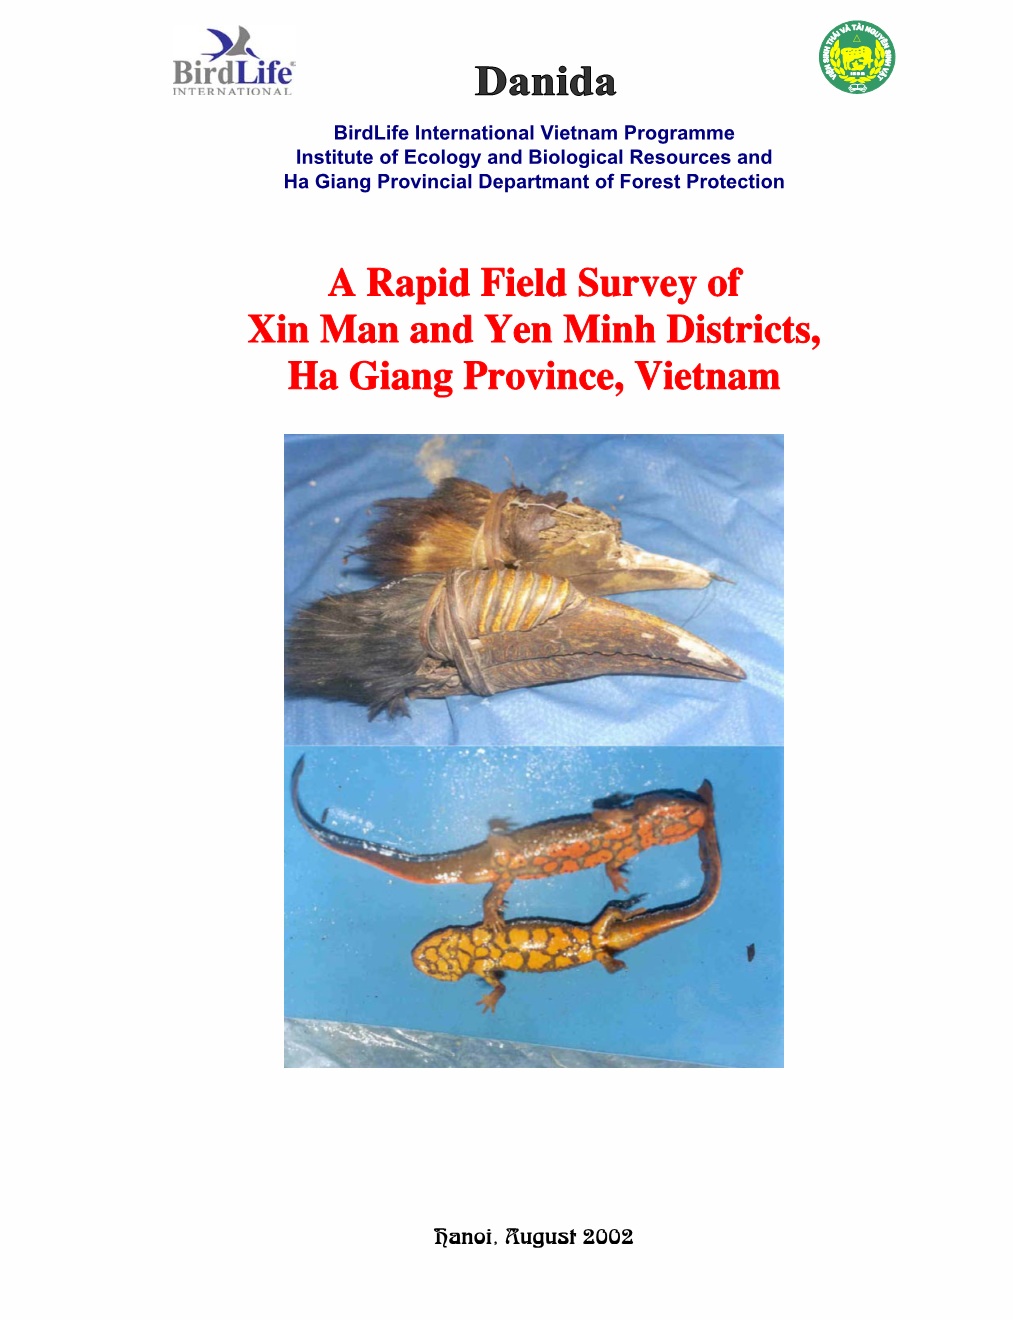 A Rapid Field Survey of Xin Man and Yen Minh Districts, Ha Giang Province, Vietnam